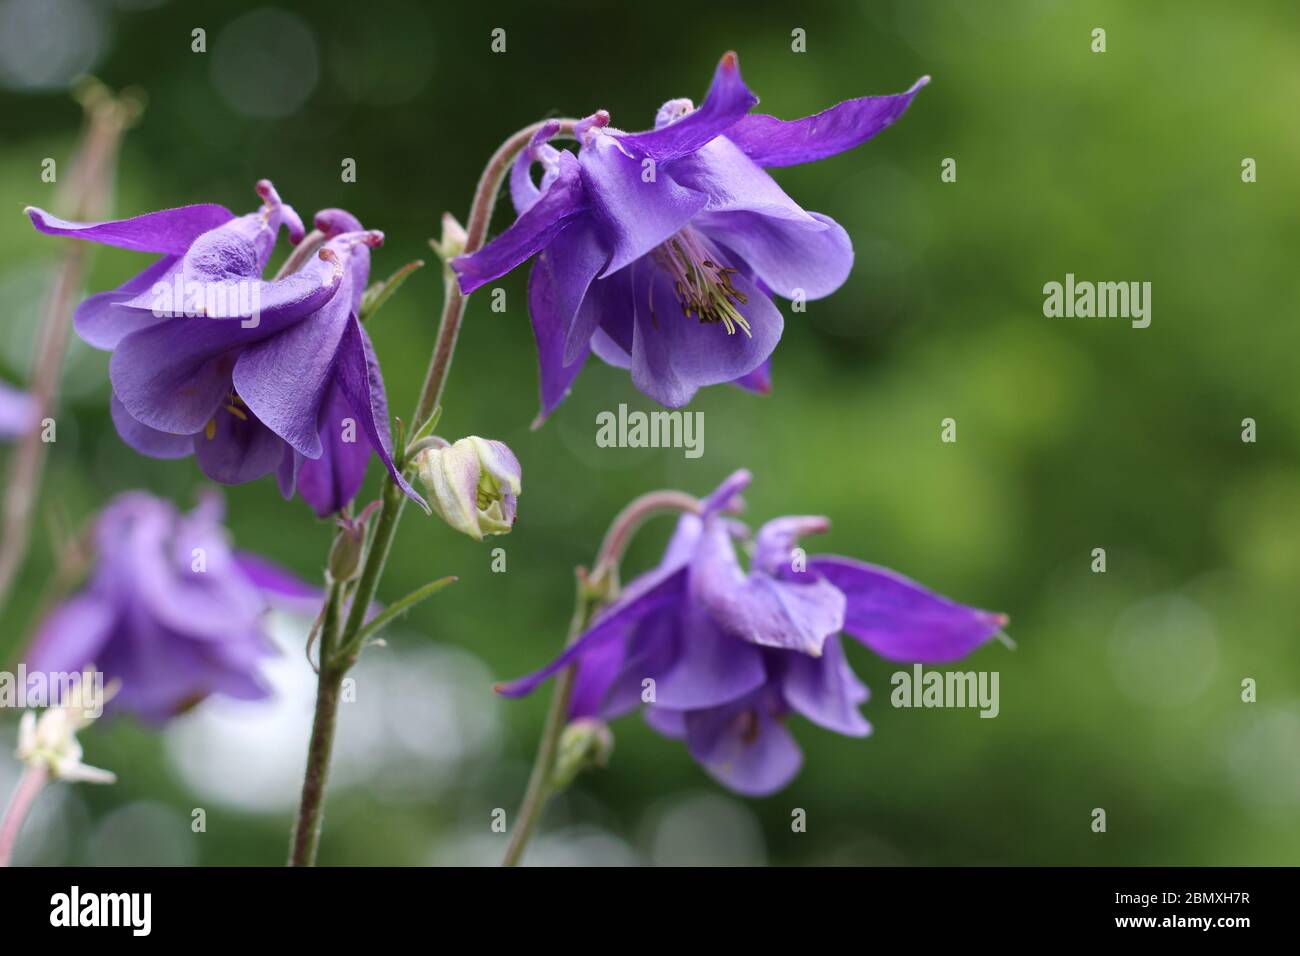 The beautiful bright purple flowers of Aquilegia vulgaris close up in a natural outdoor setting with green bokeh background. Copyspace to right. Stock Photo